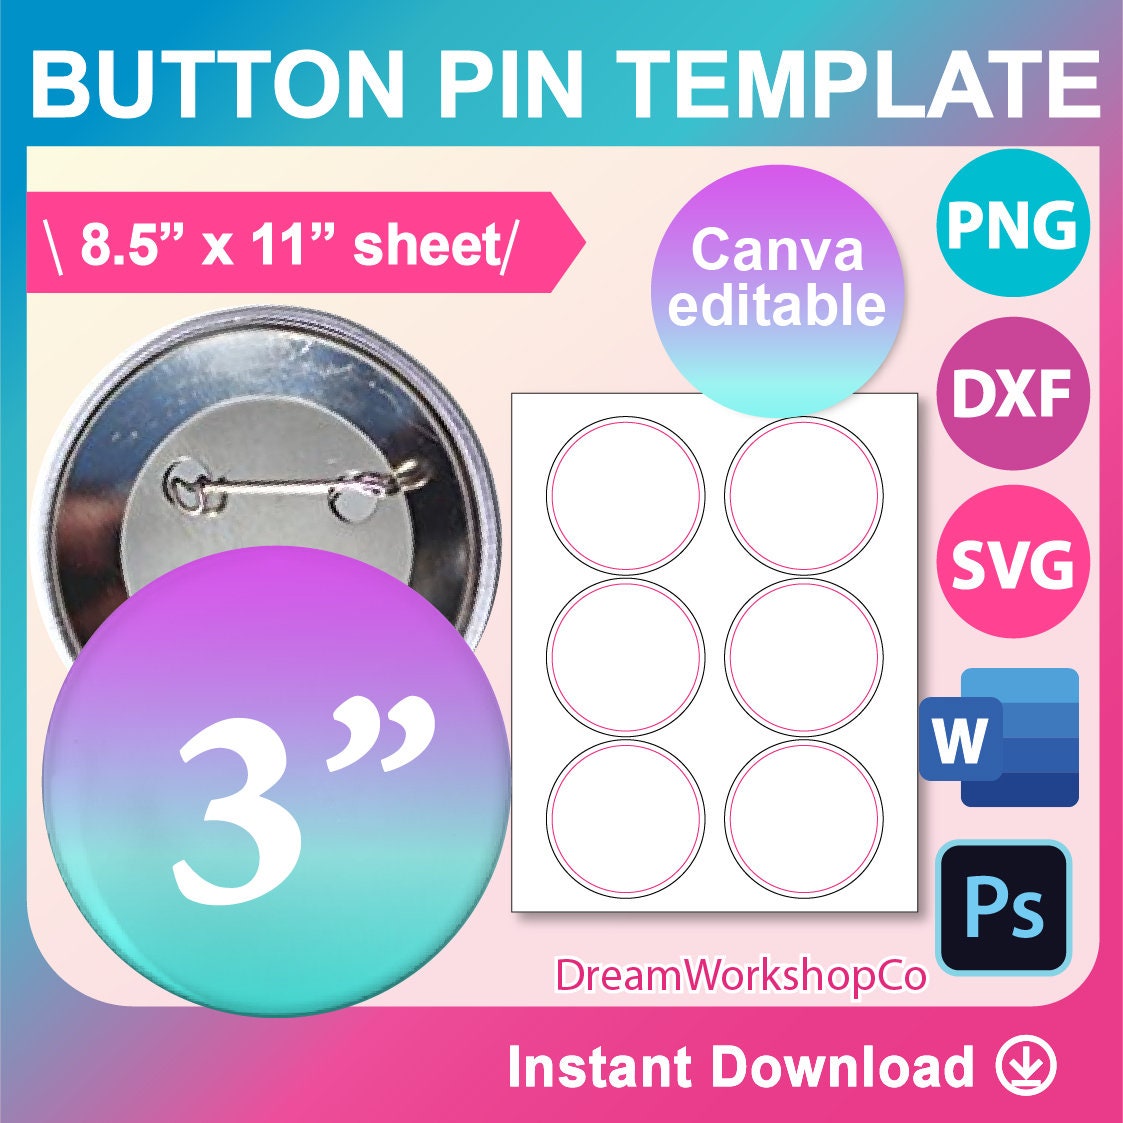 Mockup Digital Photo Template for Pin Back Button on White